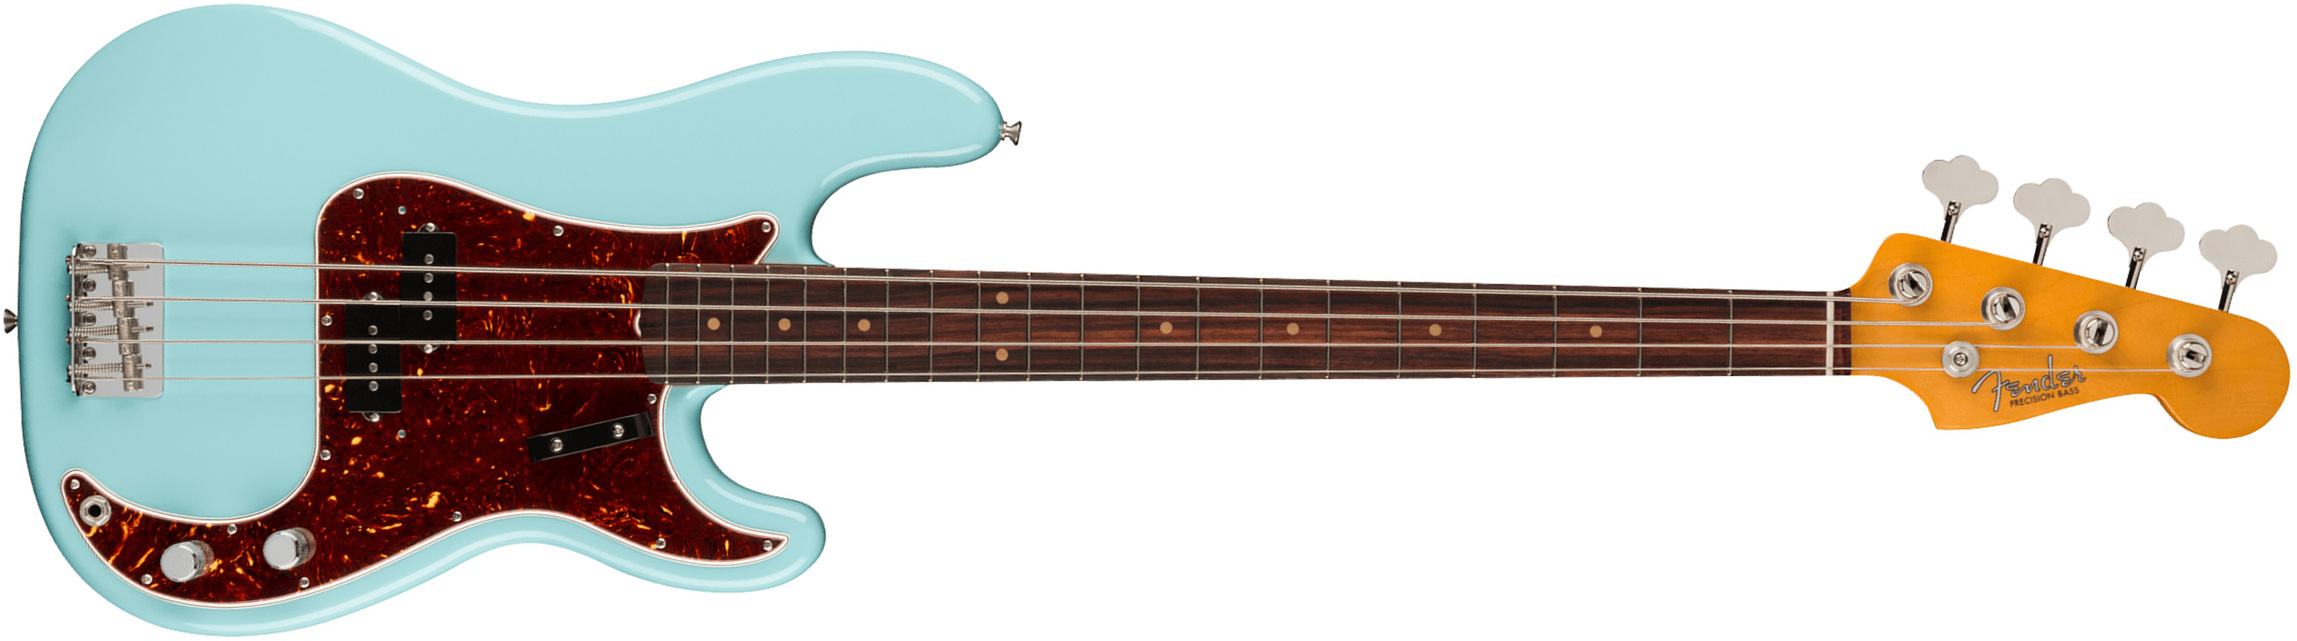 Fender Precision Bass 1960 American Vintage Ii Usa Rw - Daphne Blue - Solid body electric bass - Main picture